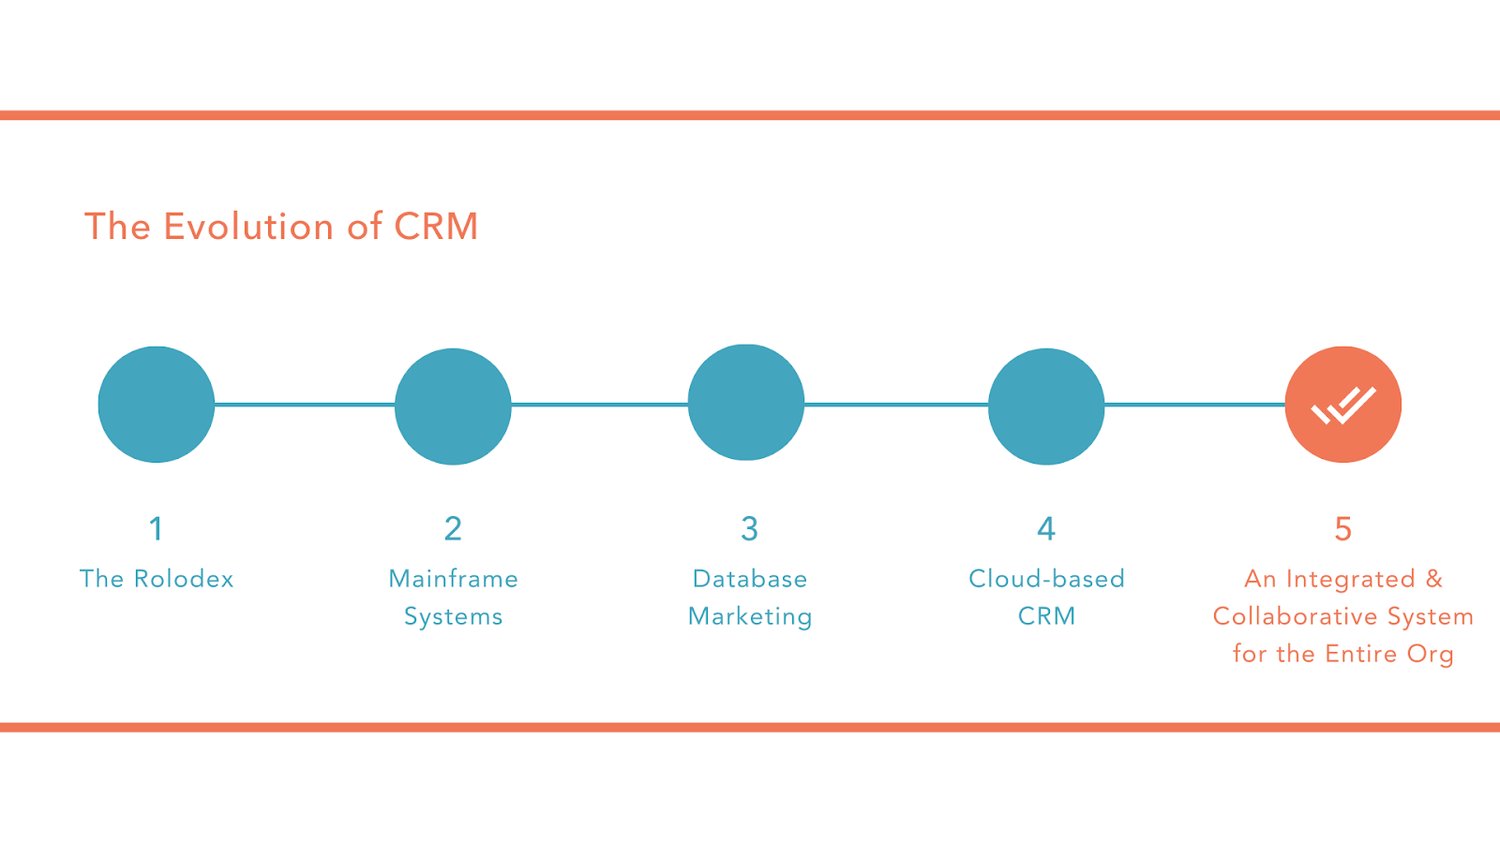 Graphic showing how the CRM evolved until becoming a collaborative system